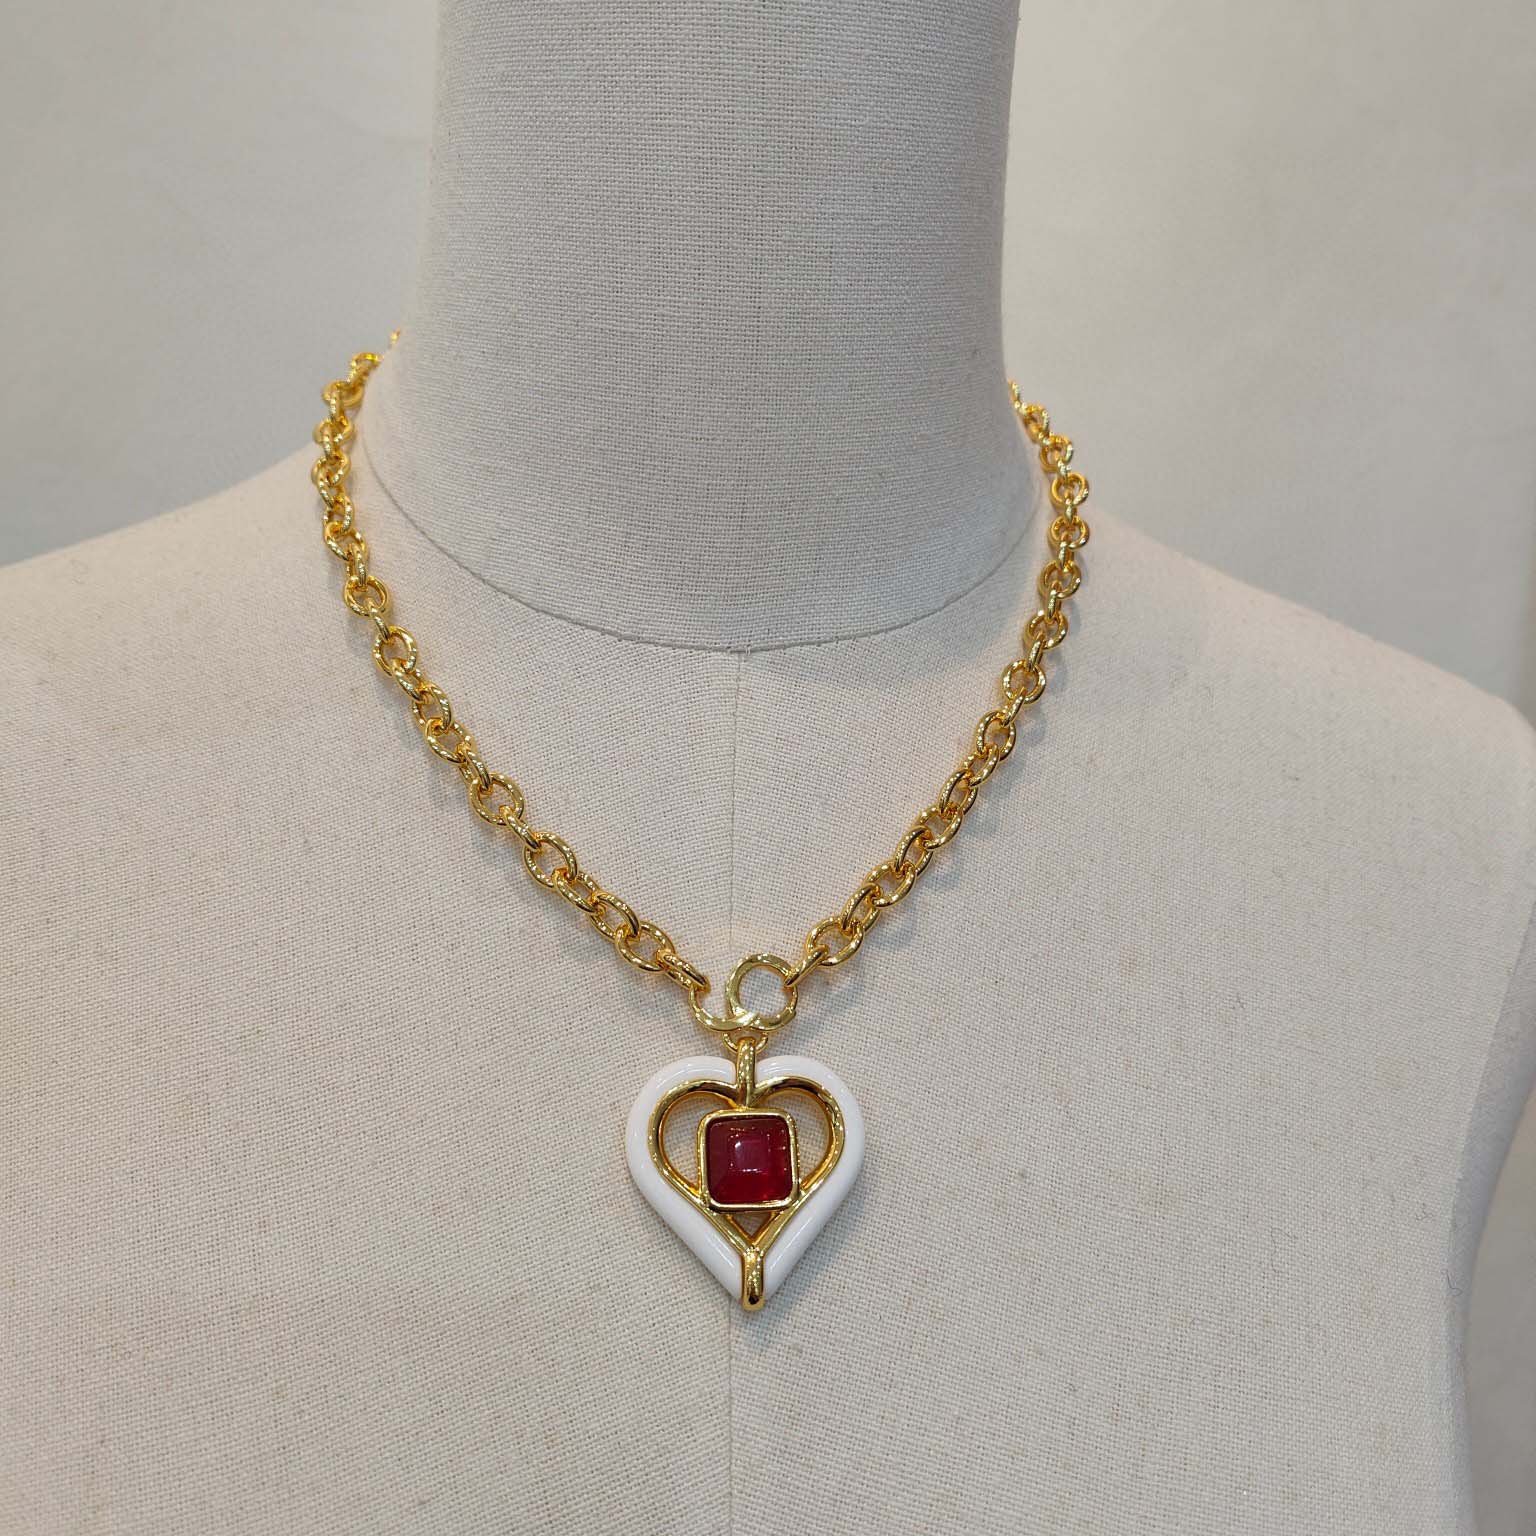 2023 Luxury Quality Charm Heart Shape Pendant Necklace With Red Diamond in 18K Gold Plated Have Stamp Box PS7520A326A